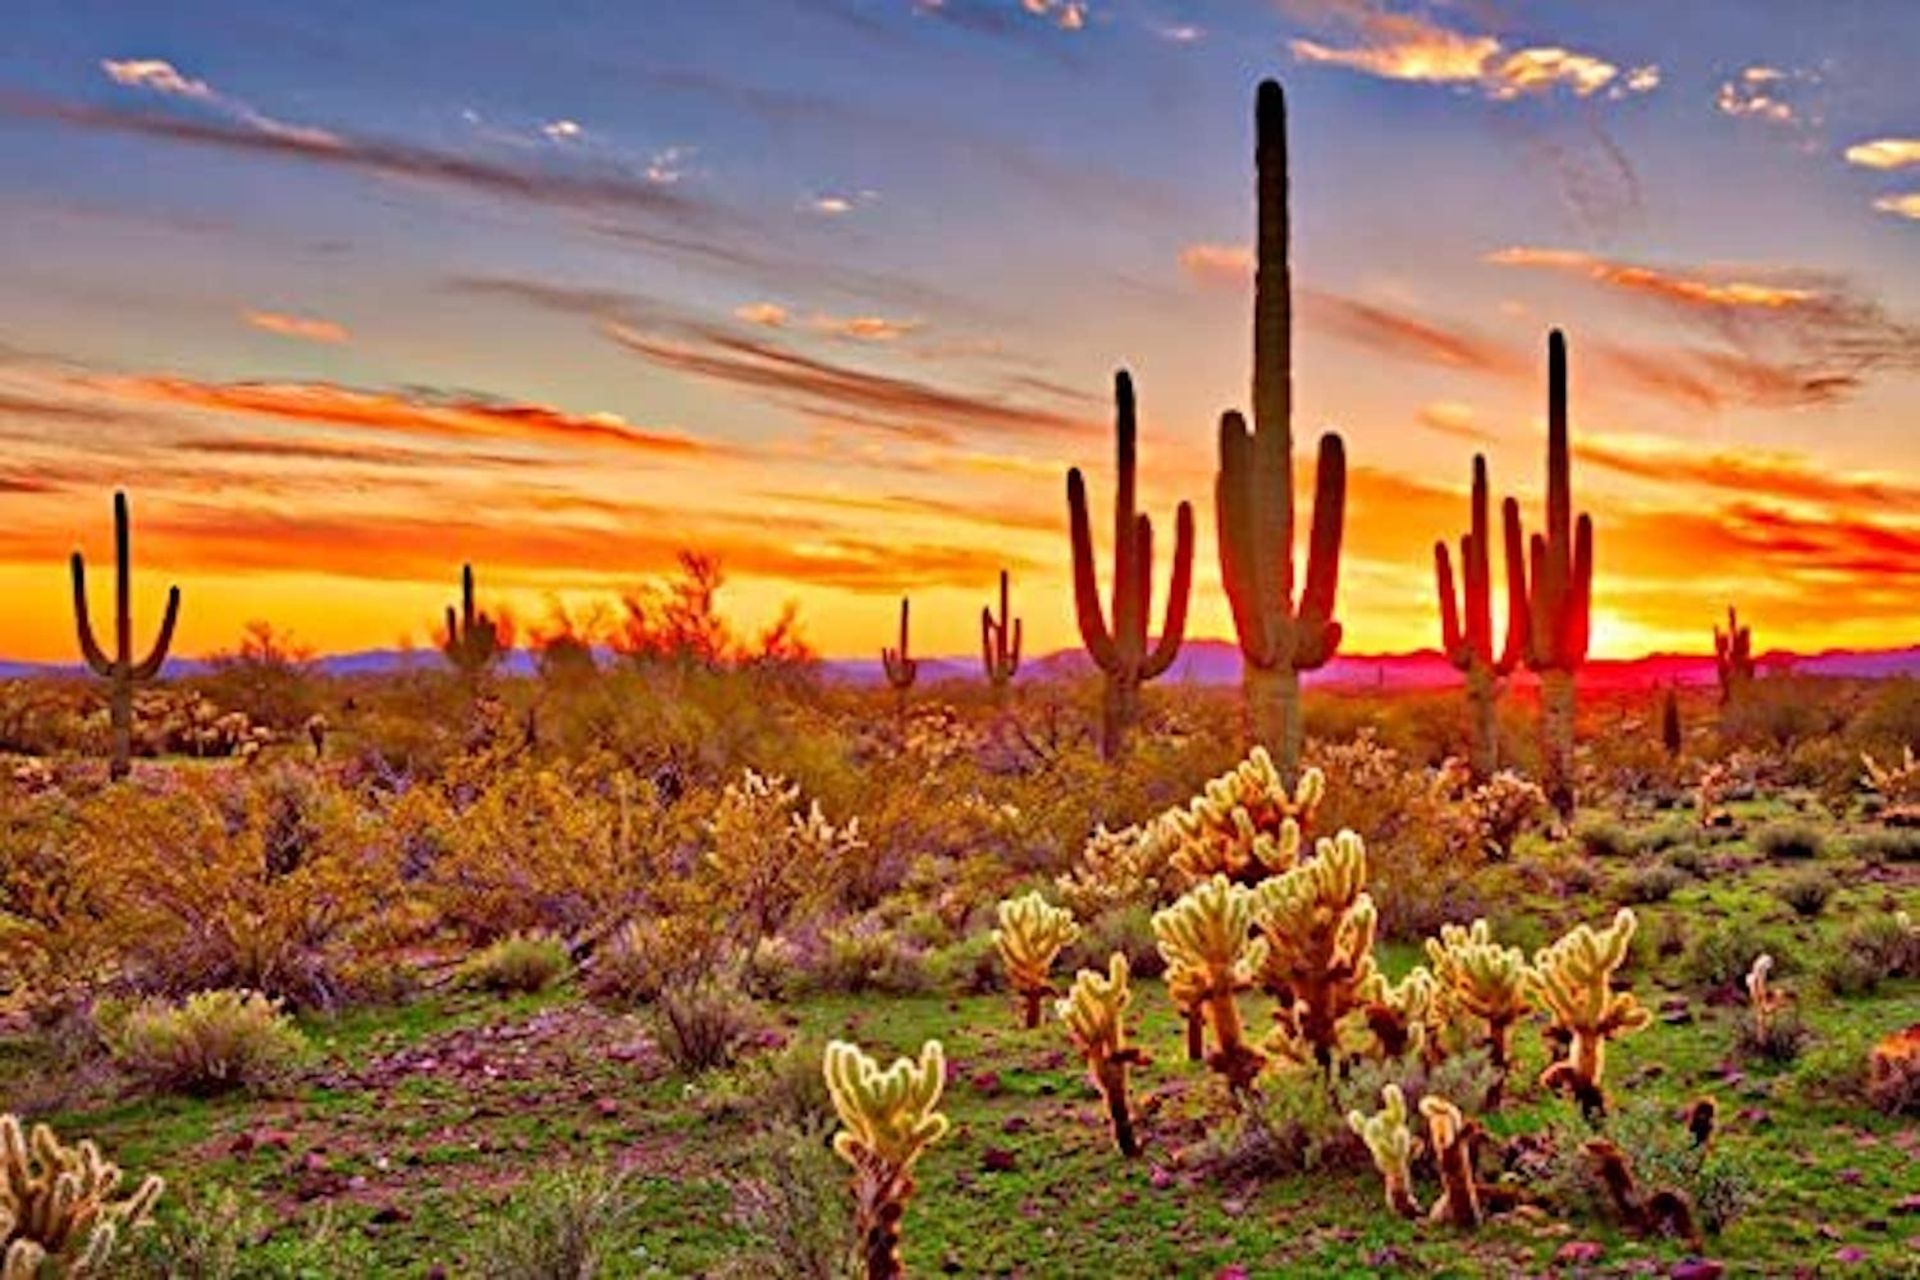 Do You Love Small-Town Charm? Then You'll Love Cochise County, AZ!